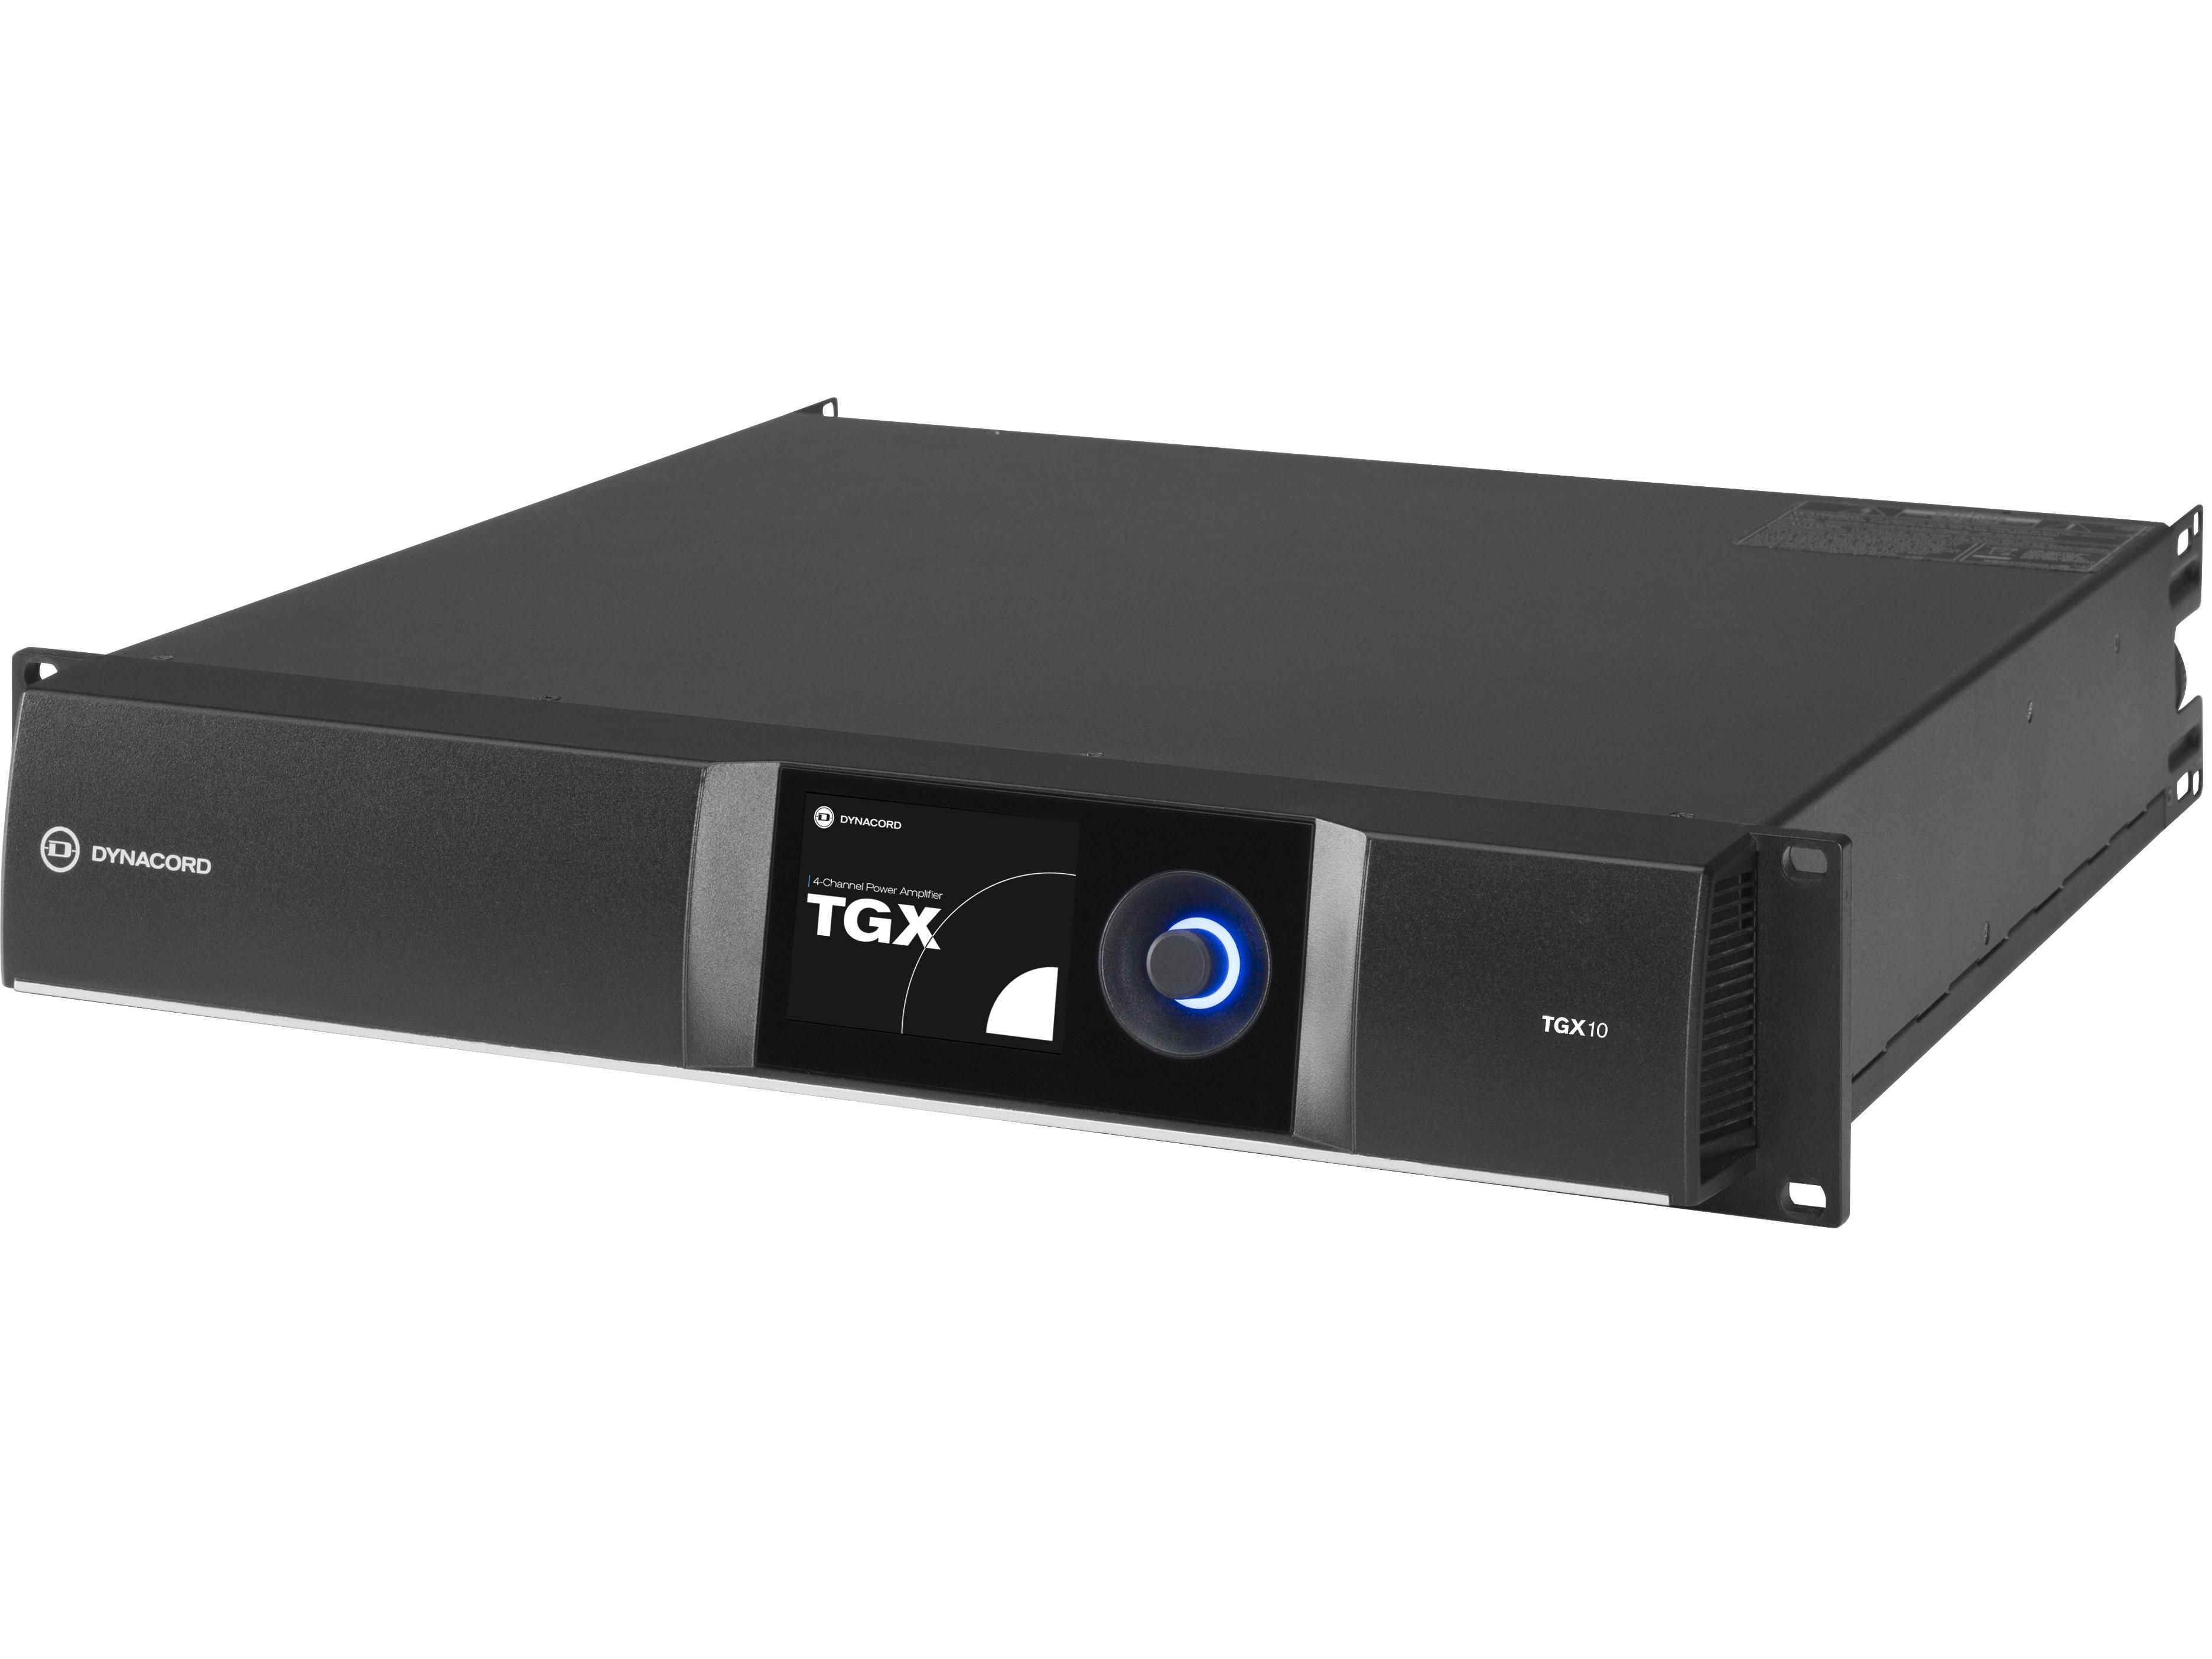 TGX10 4 x 2500W DSP Amplifier with OMNEO/AES/EBU by Electro-Voice